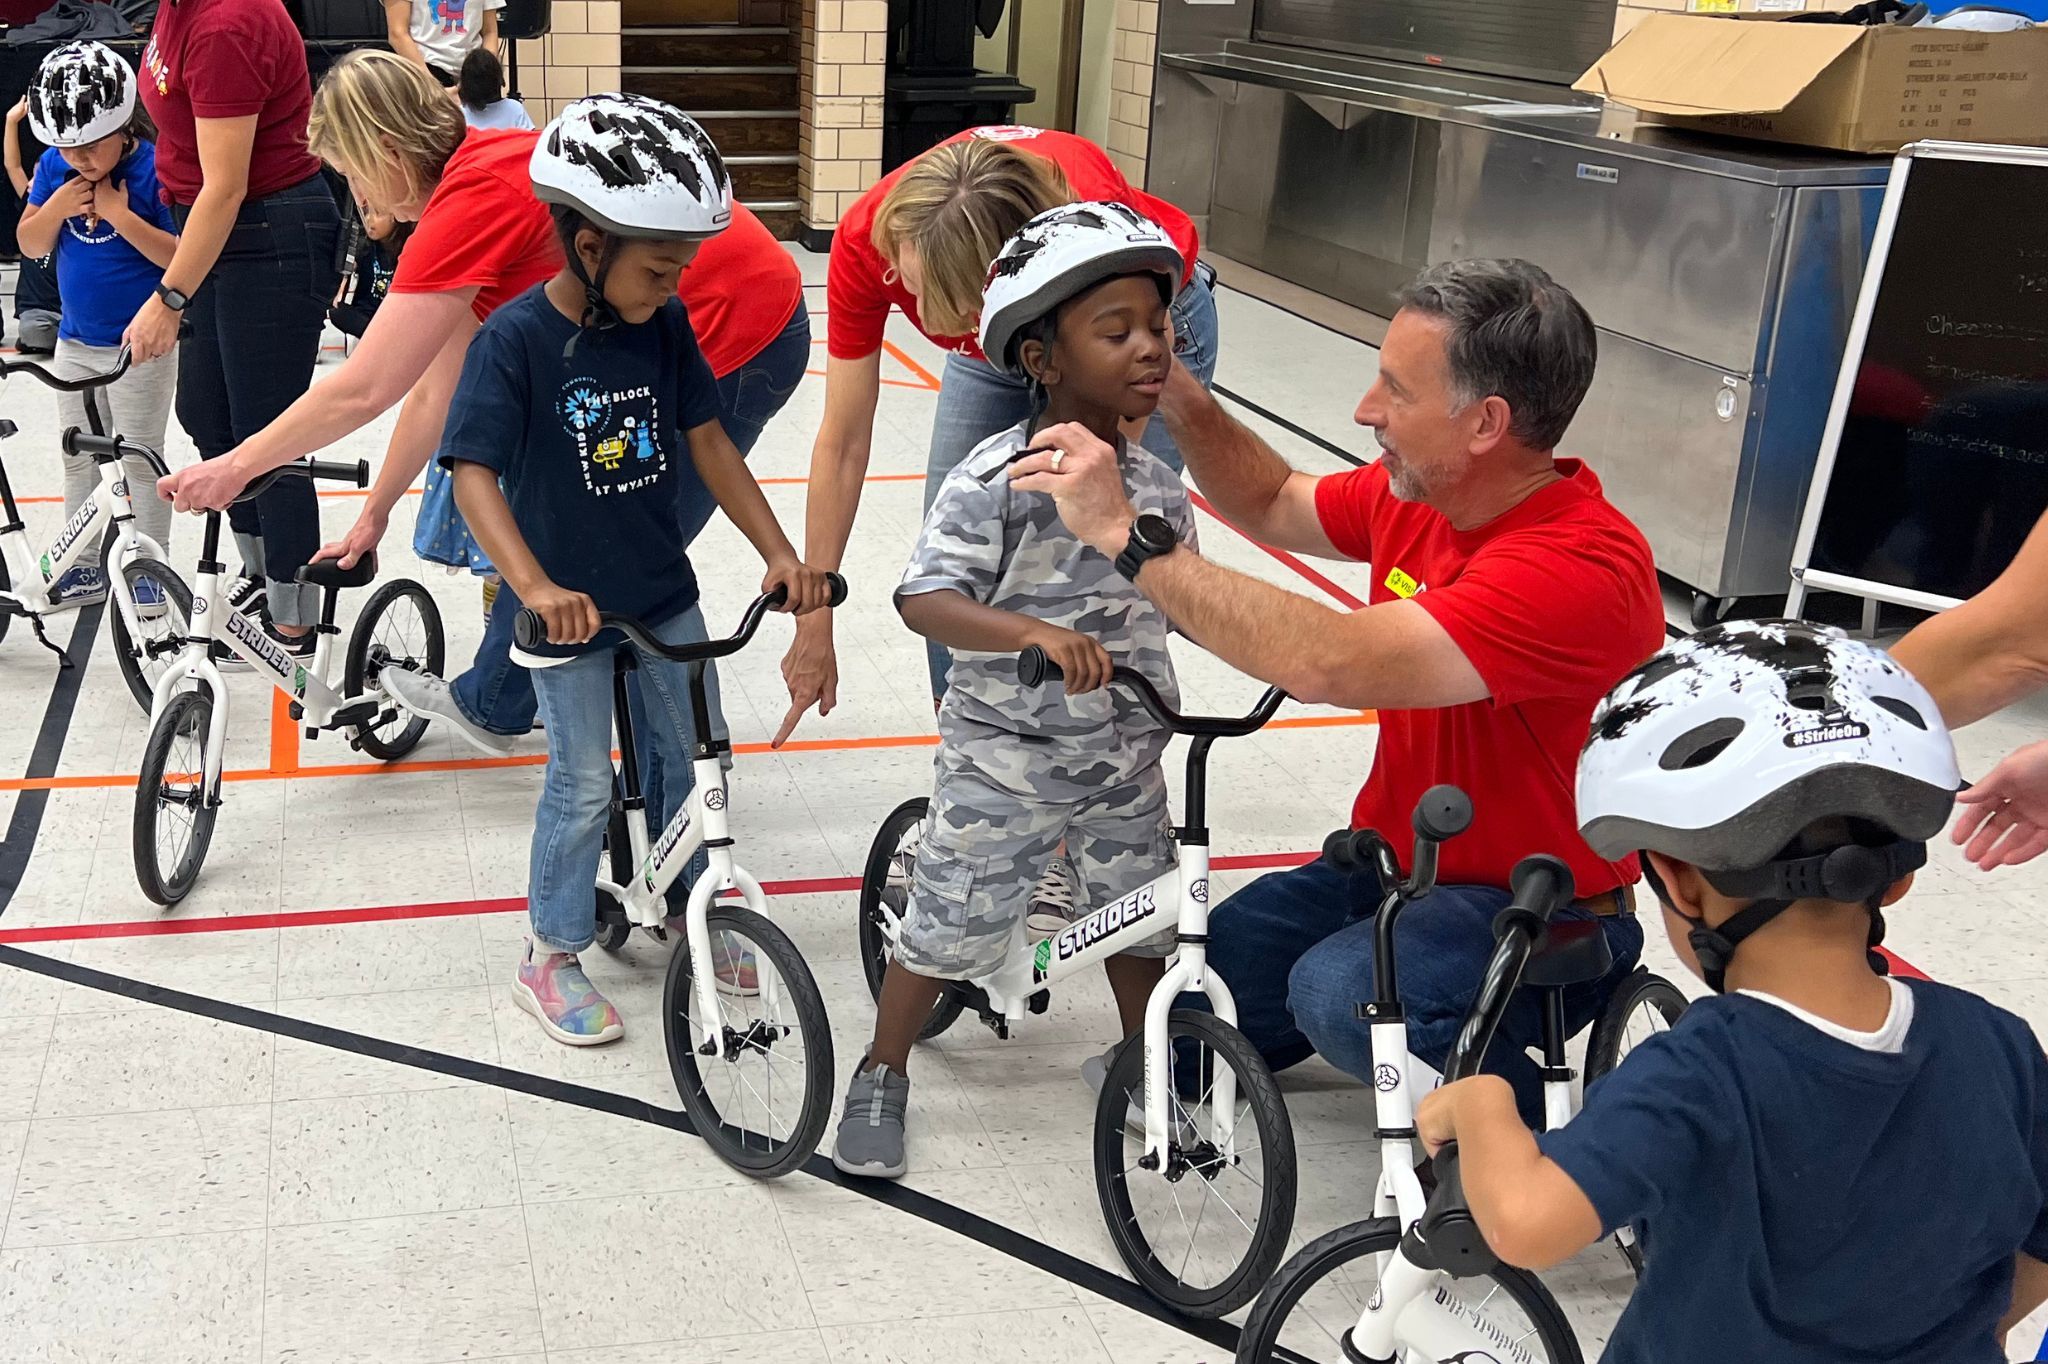 Adults helping children to put on helmets for biking lesson in kindergarten PE gym class